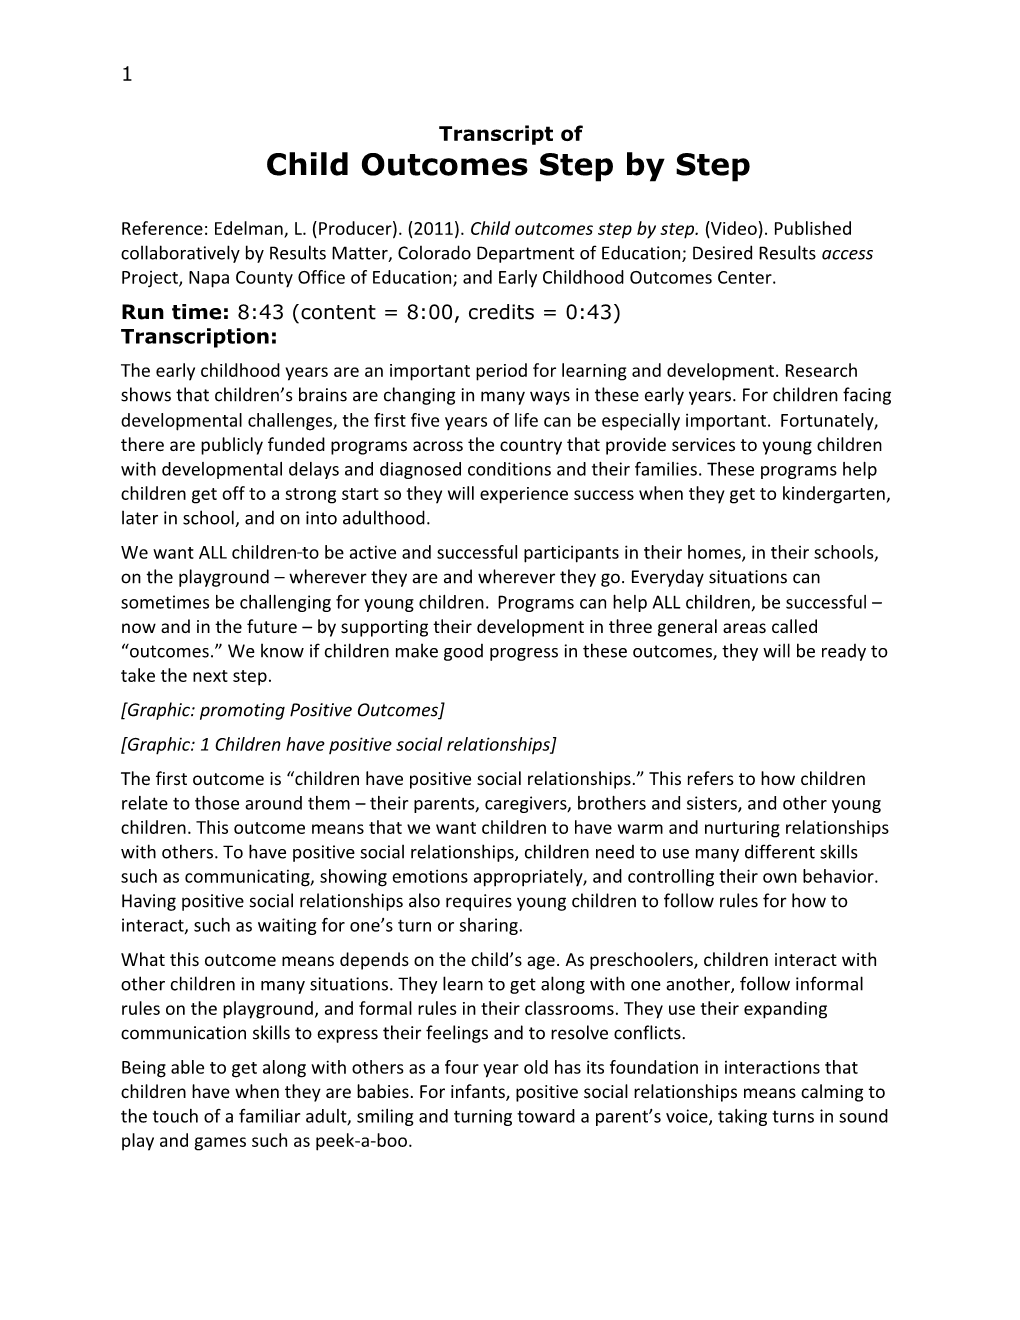 Transcript of Child Outcomes Step by Step